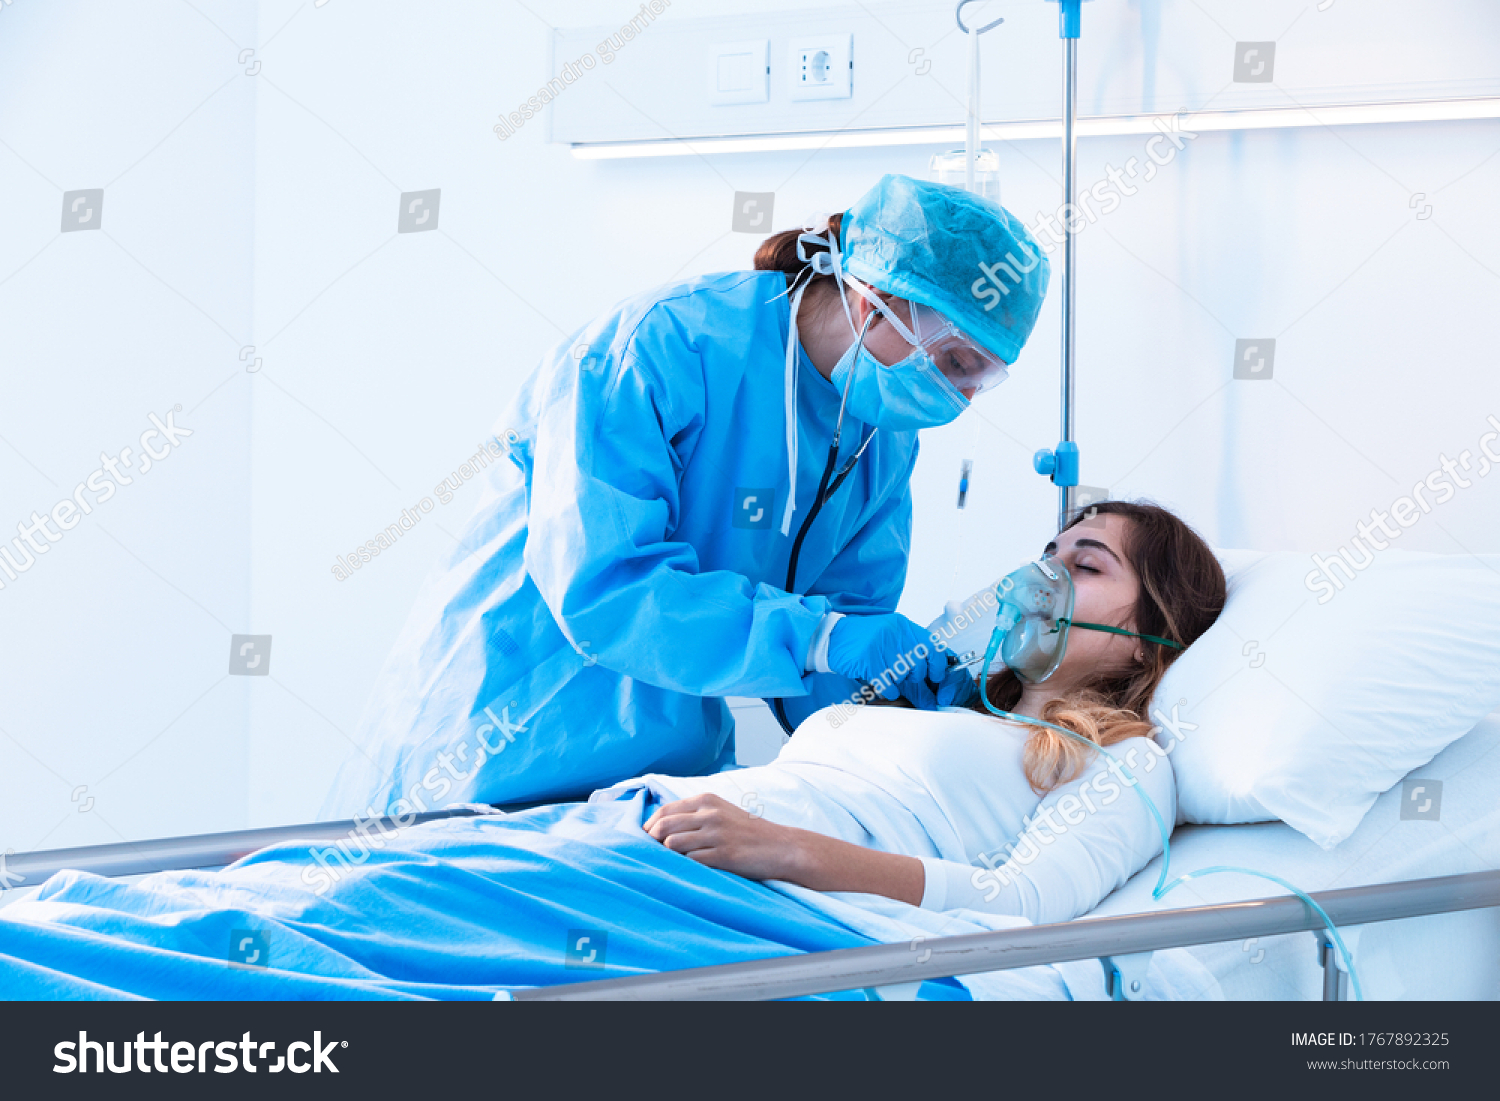 Doctor examining female patient in critical health conditions using a stethoscope in the intensive care unit of a modern hospital during covid-19 pandemic #1767892325